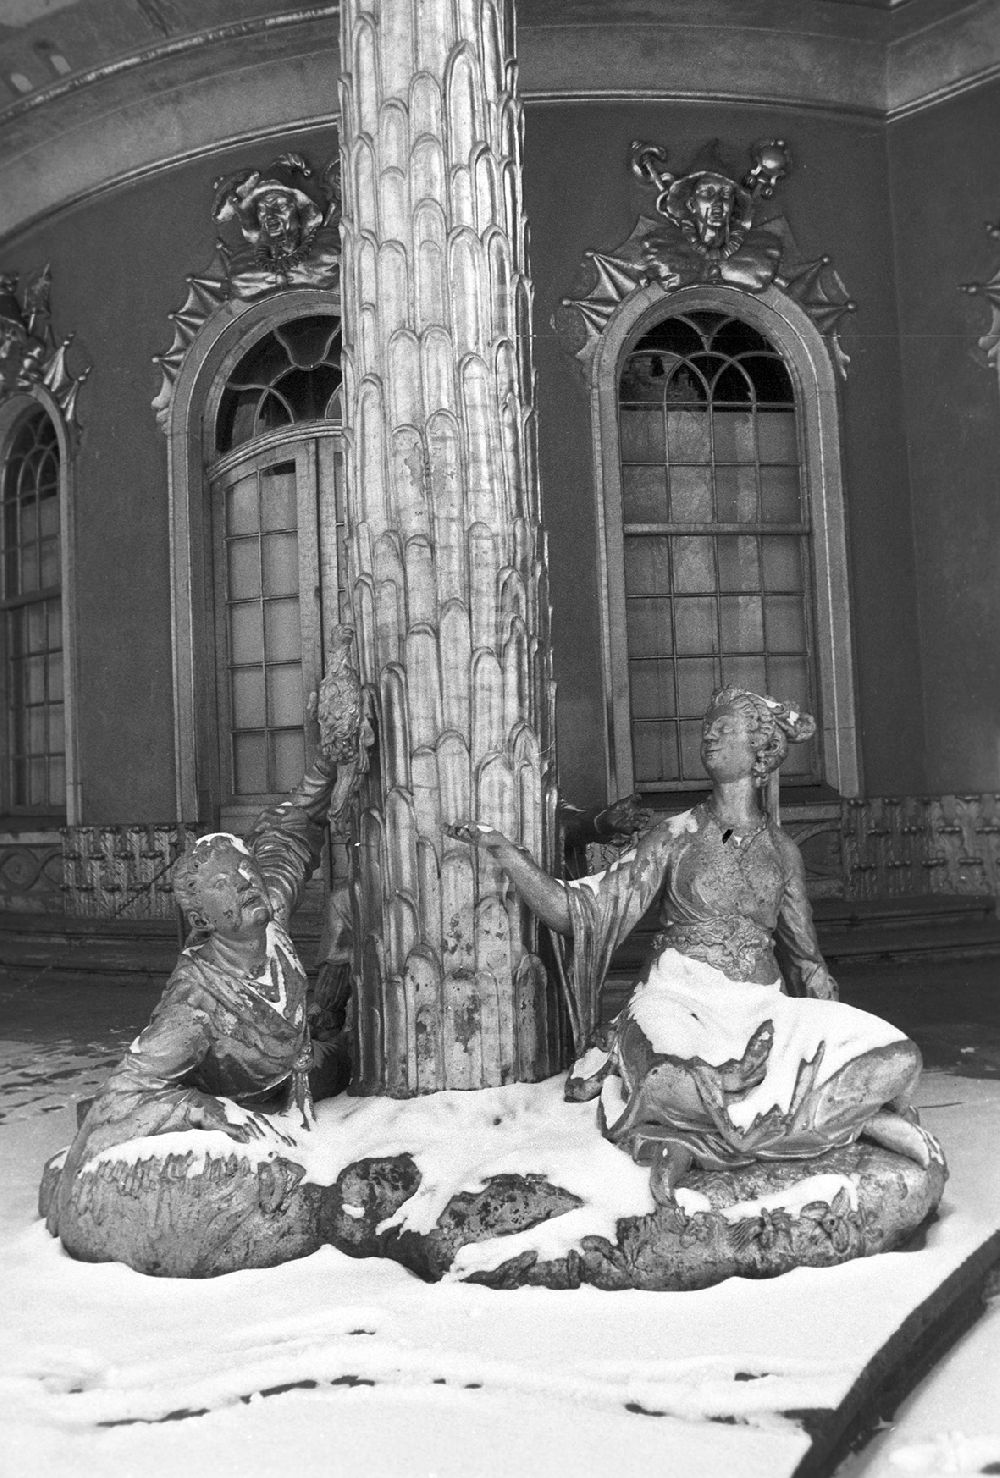 Potsdam: Group of figures at the Chinese Tea House in Sanssouci Park in Potsdam